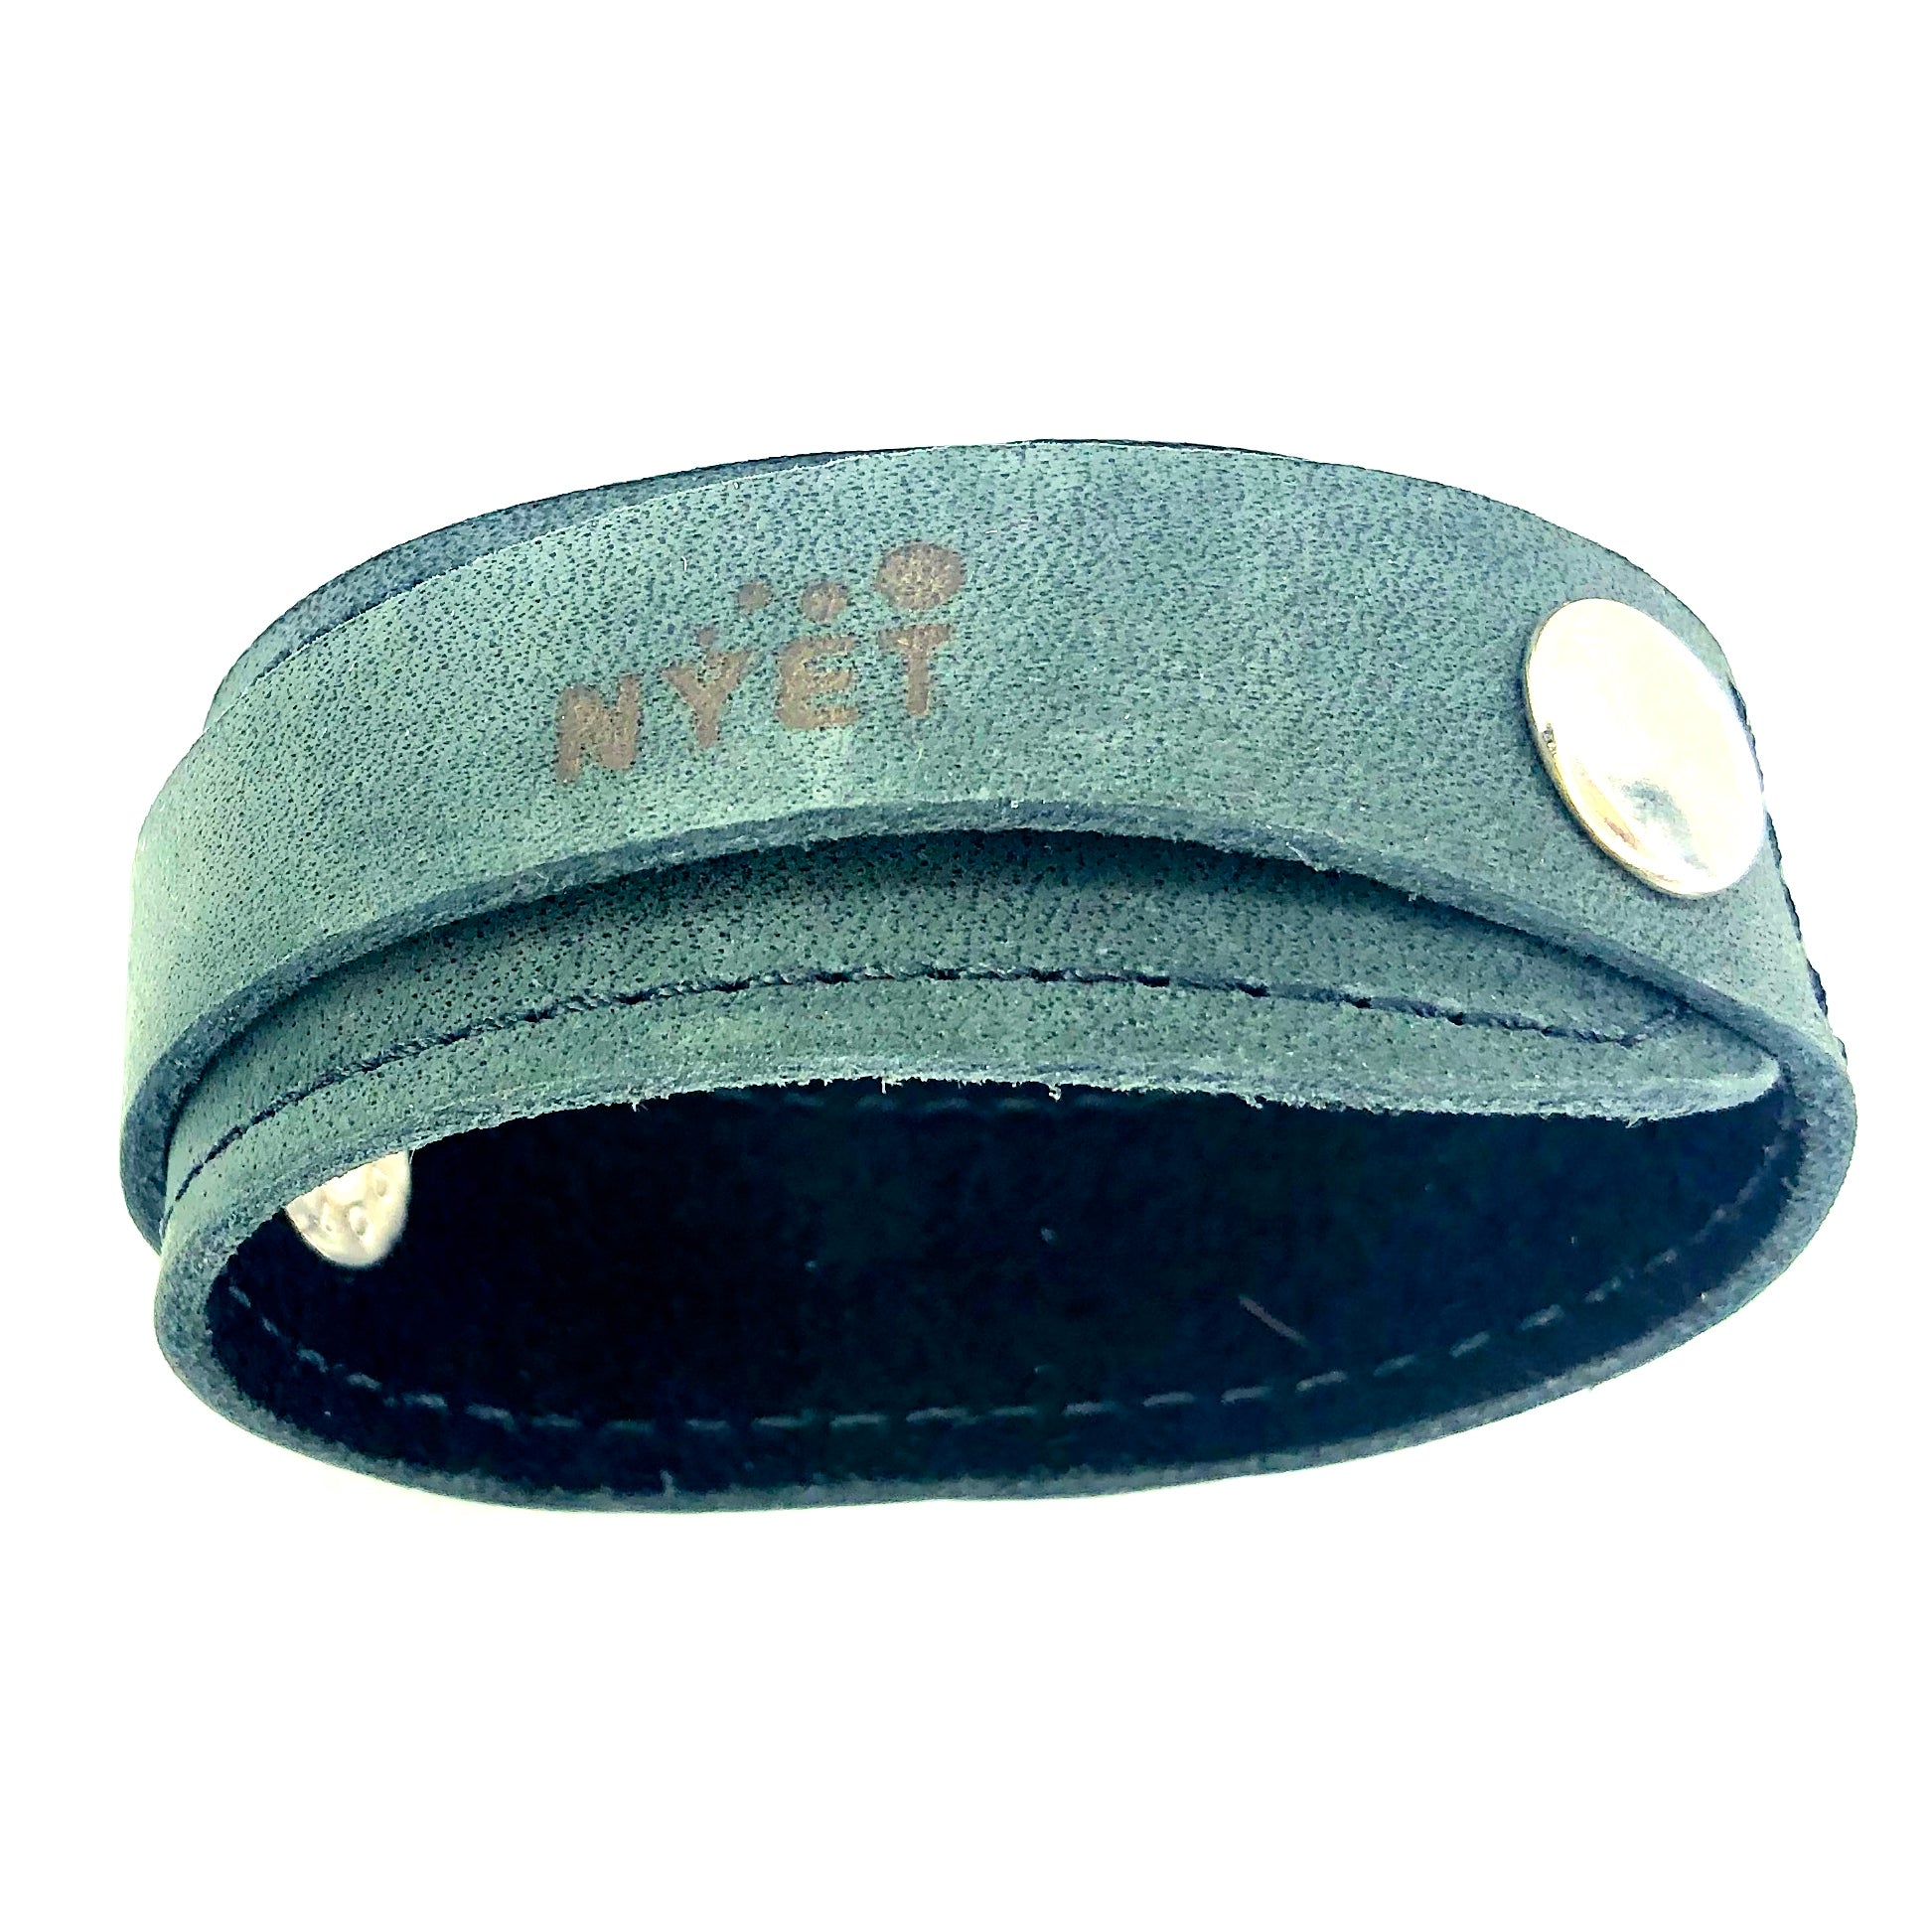 WRAP LEATHER BRACELET WITH DOUBLE SNAP CLOSURE by nyet jewelry.